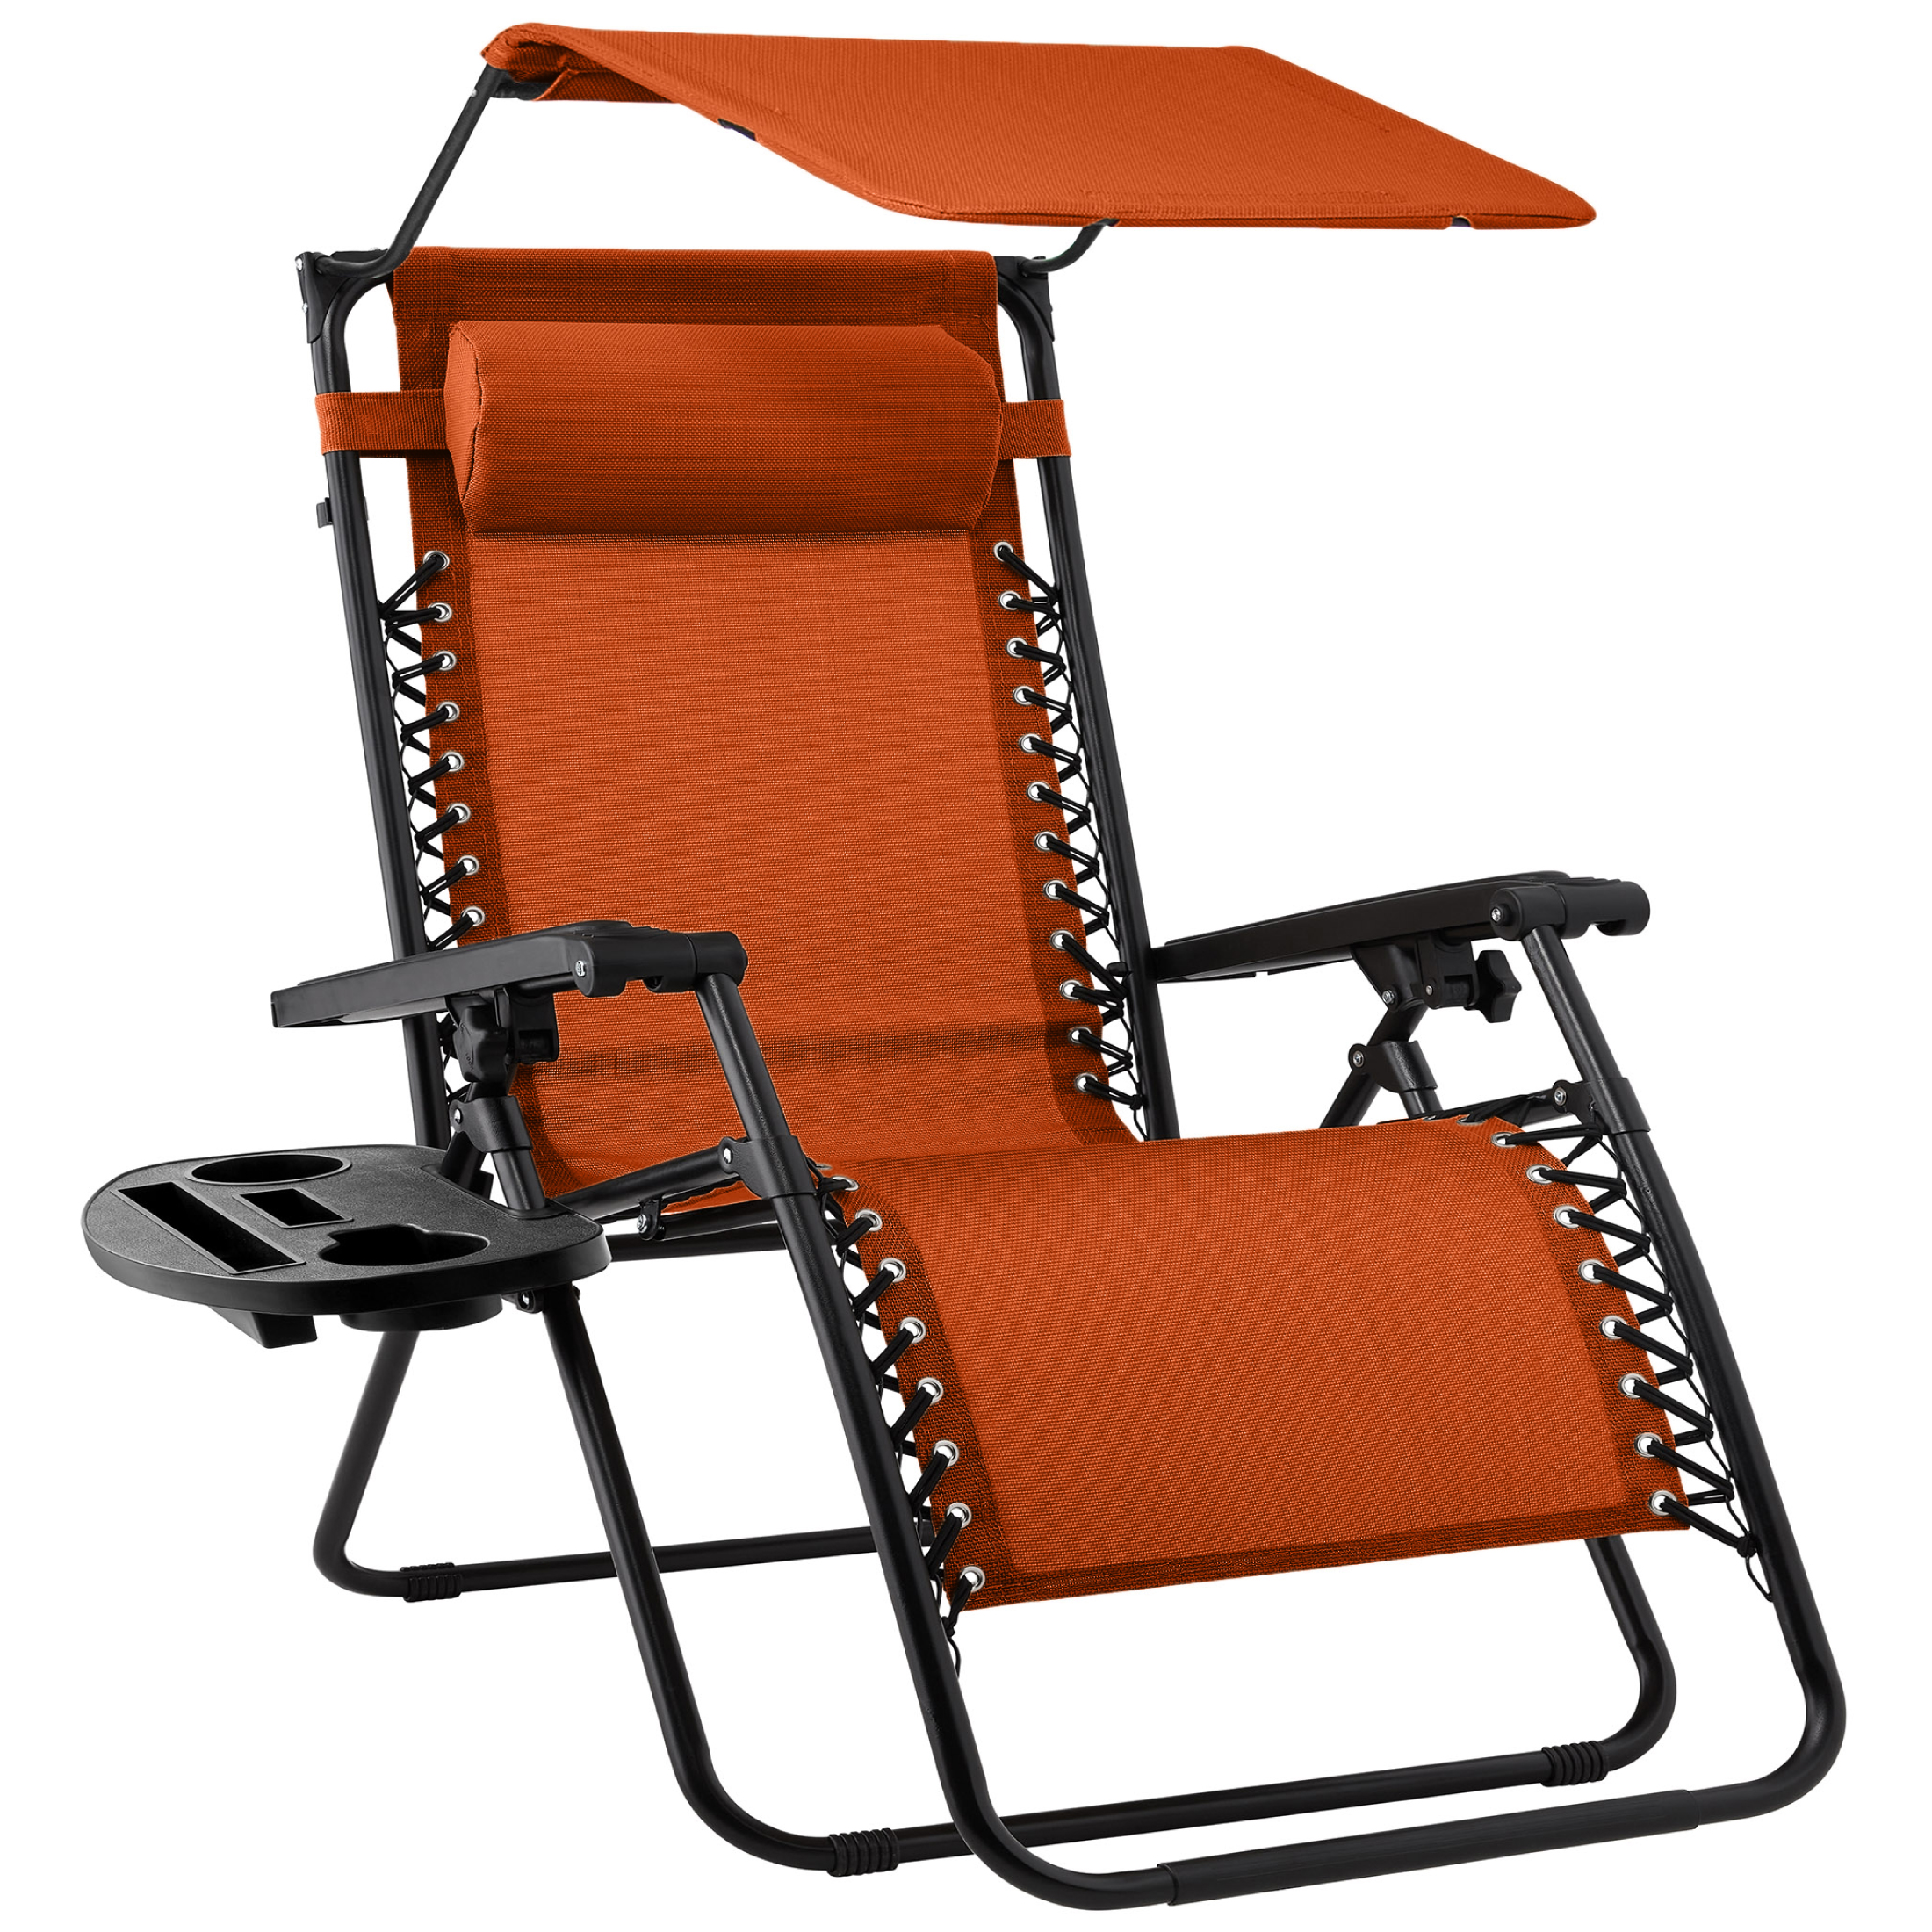 Best Choice Products Folding Zero Gravity Recliner Patio Lounge Chair w/ Canopy Shade, Headrest, Tray - Burnt Orange - image 1 of 8